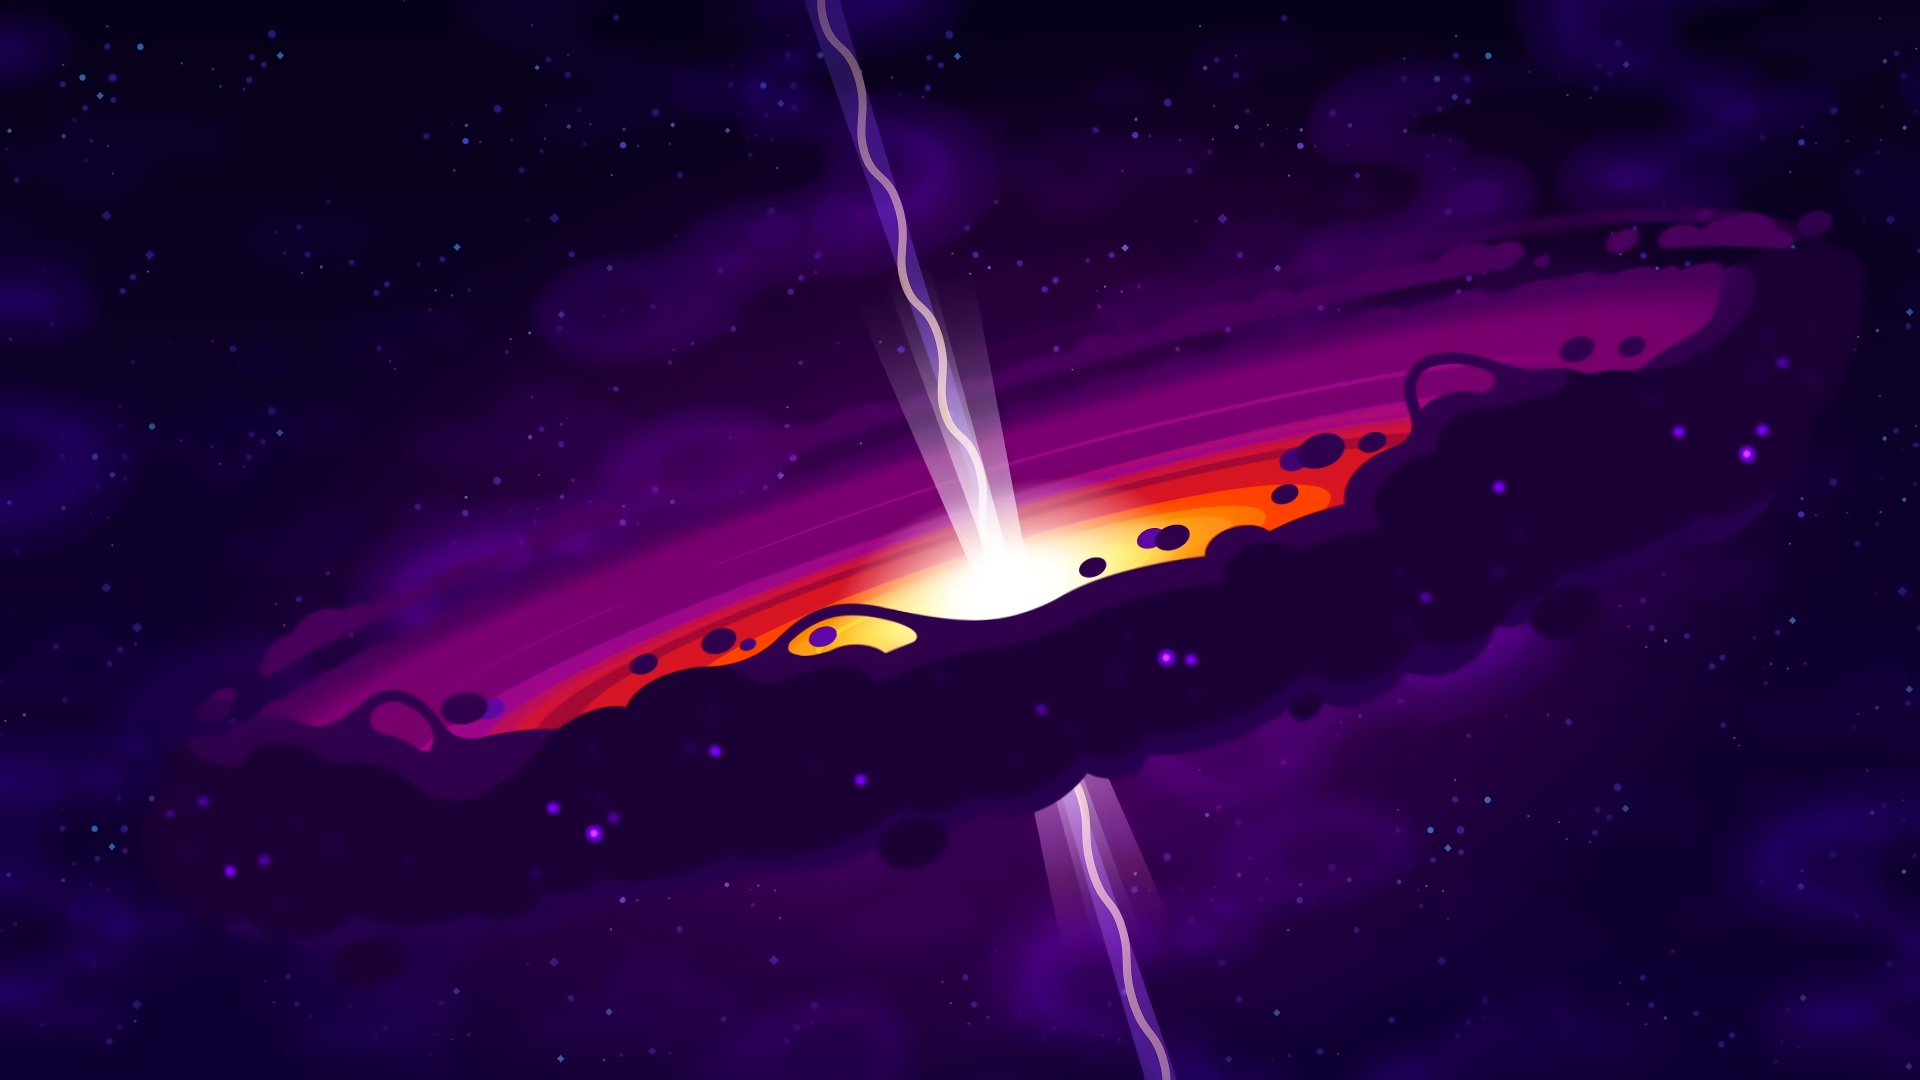 Black Hole Opening Wallpaper, HD Artist 4K Wallpapers, Images and